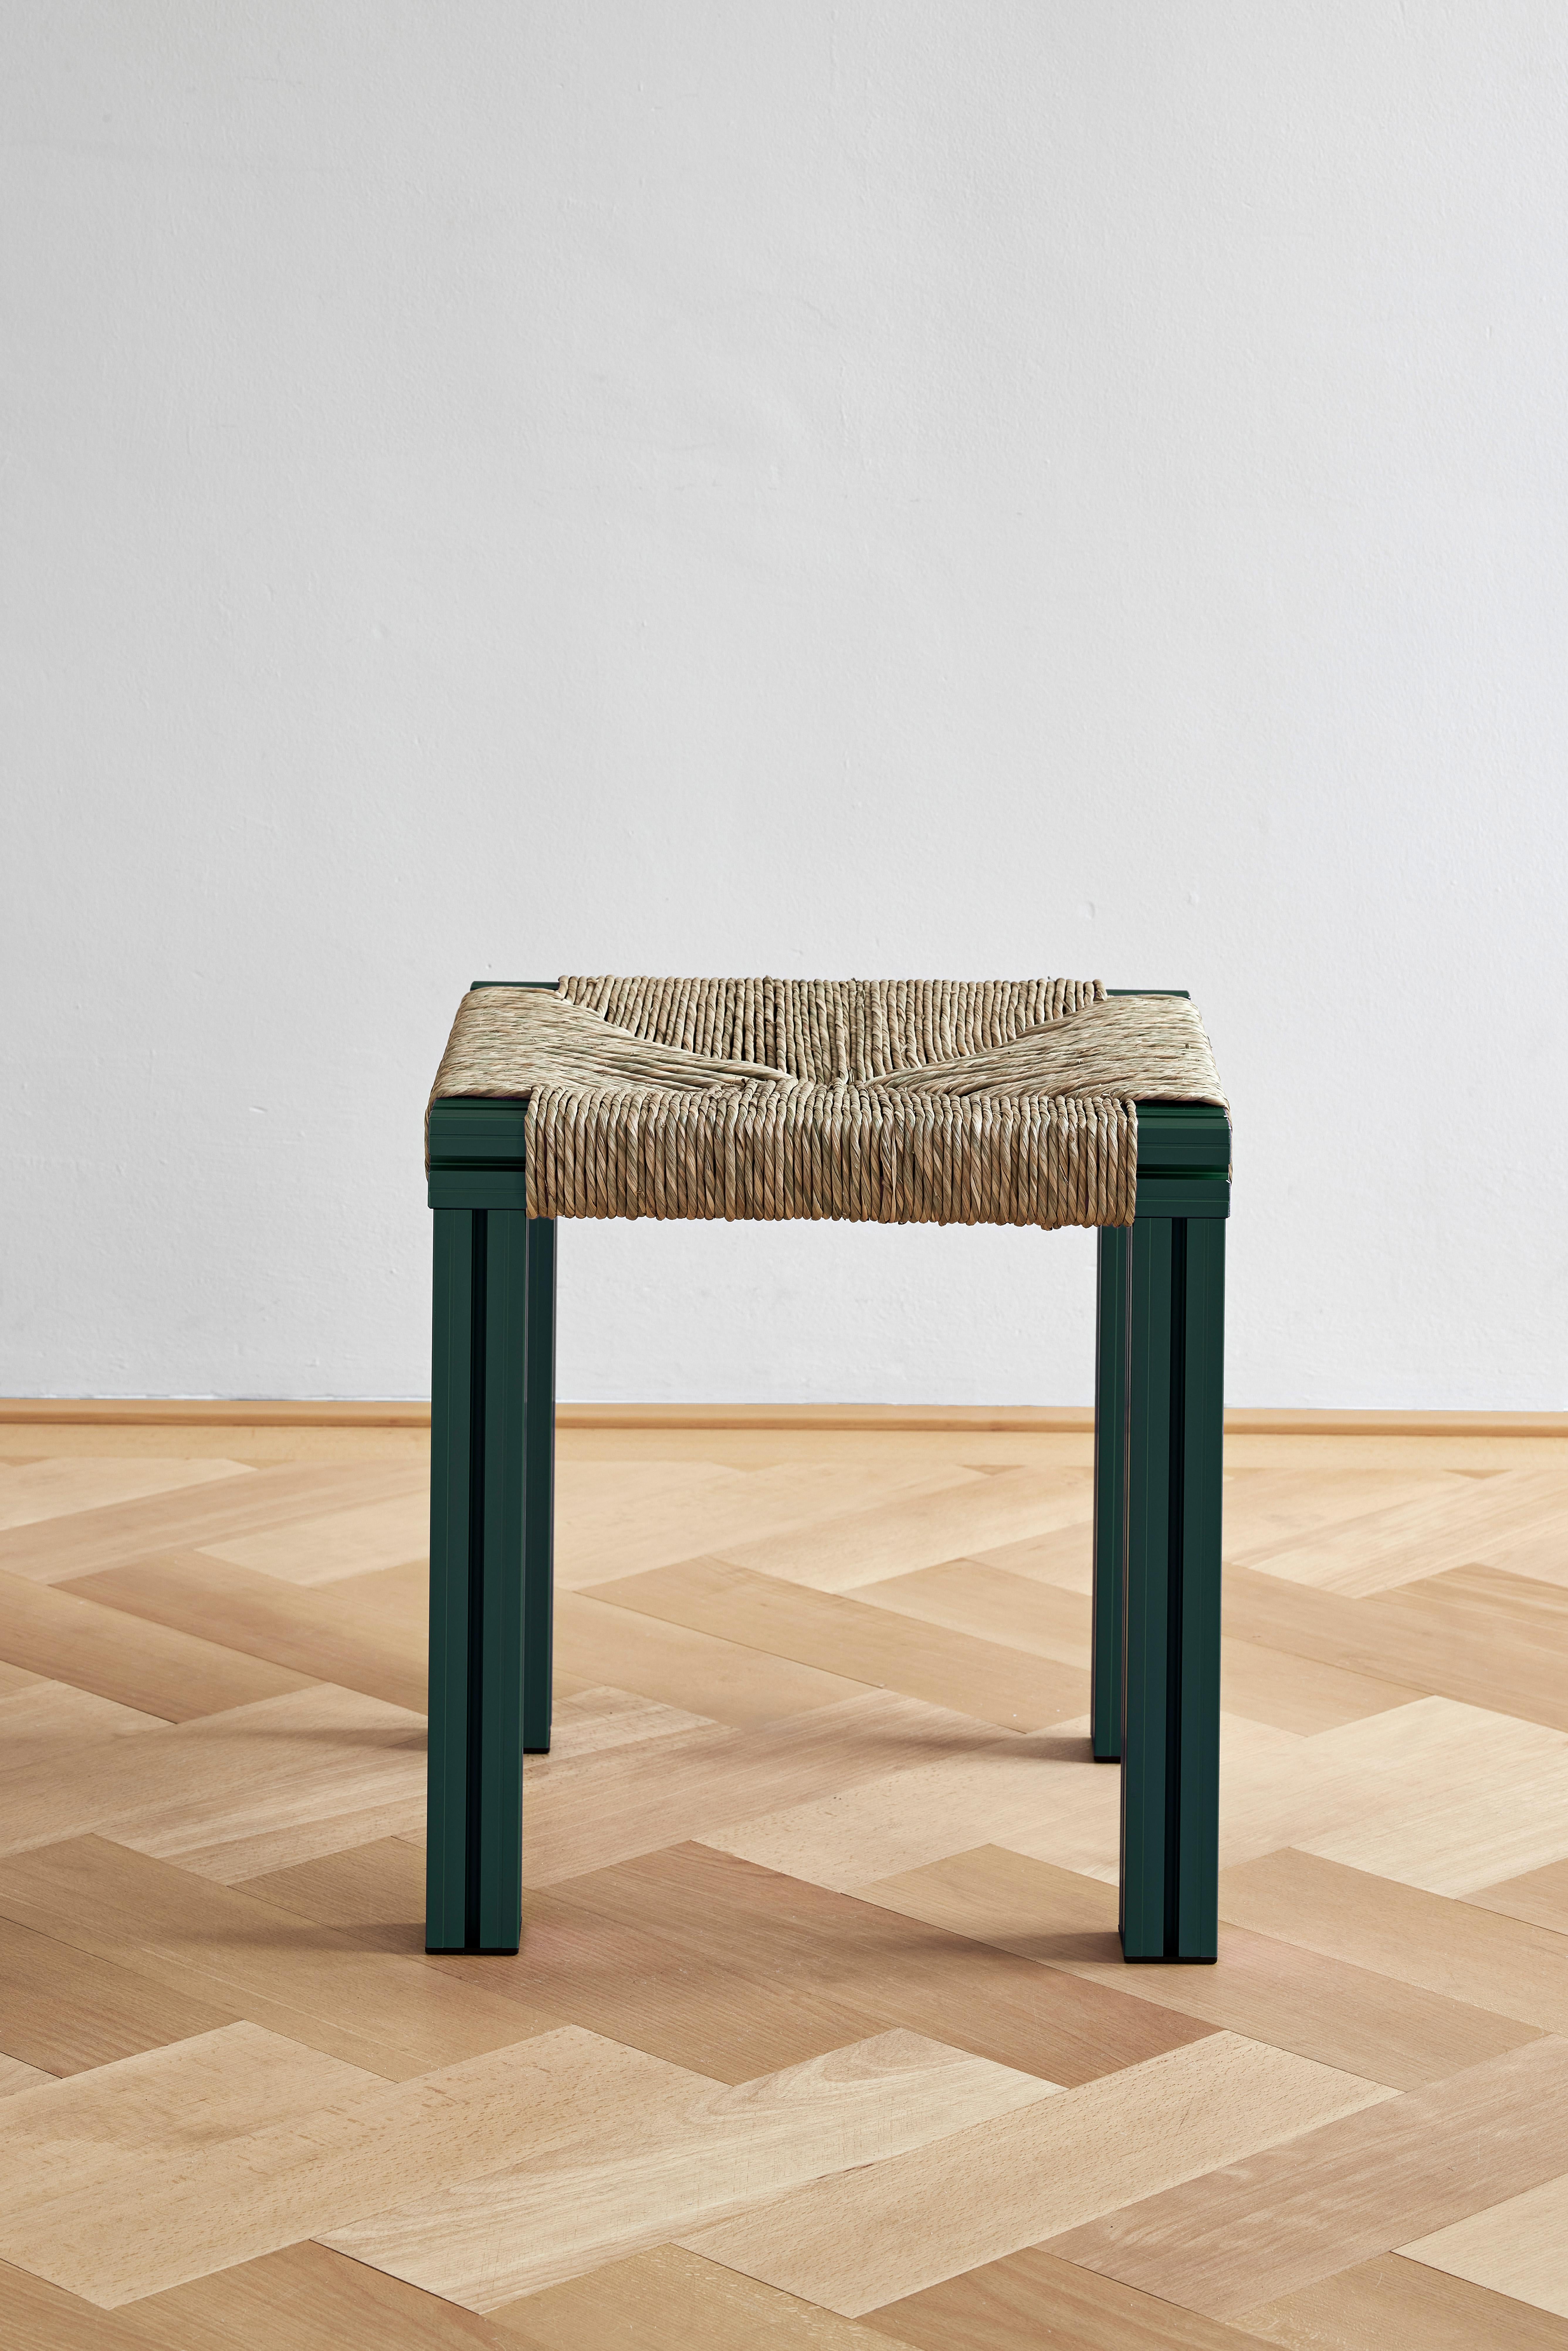 Originally realised for the Hepworth Gallery in Wakefield and inspired by Donald Judd and Børge Mogensen, Anodised Wicker marries industrially extruded and anodised aluminium with hand-woven cane wicker, rush envelope and flax webbing seats. The